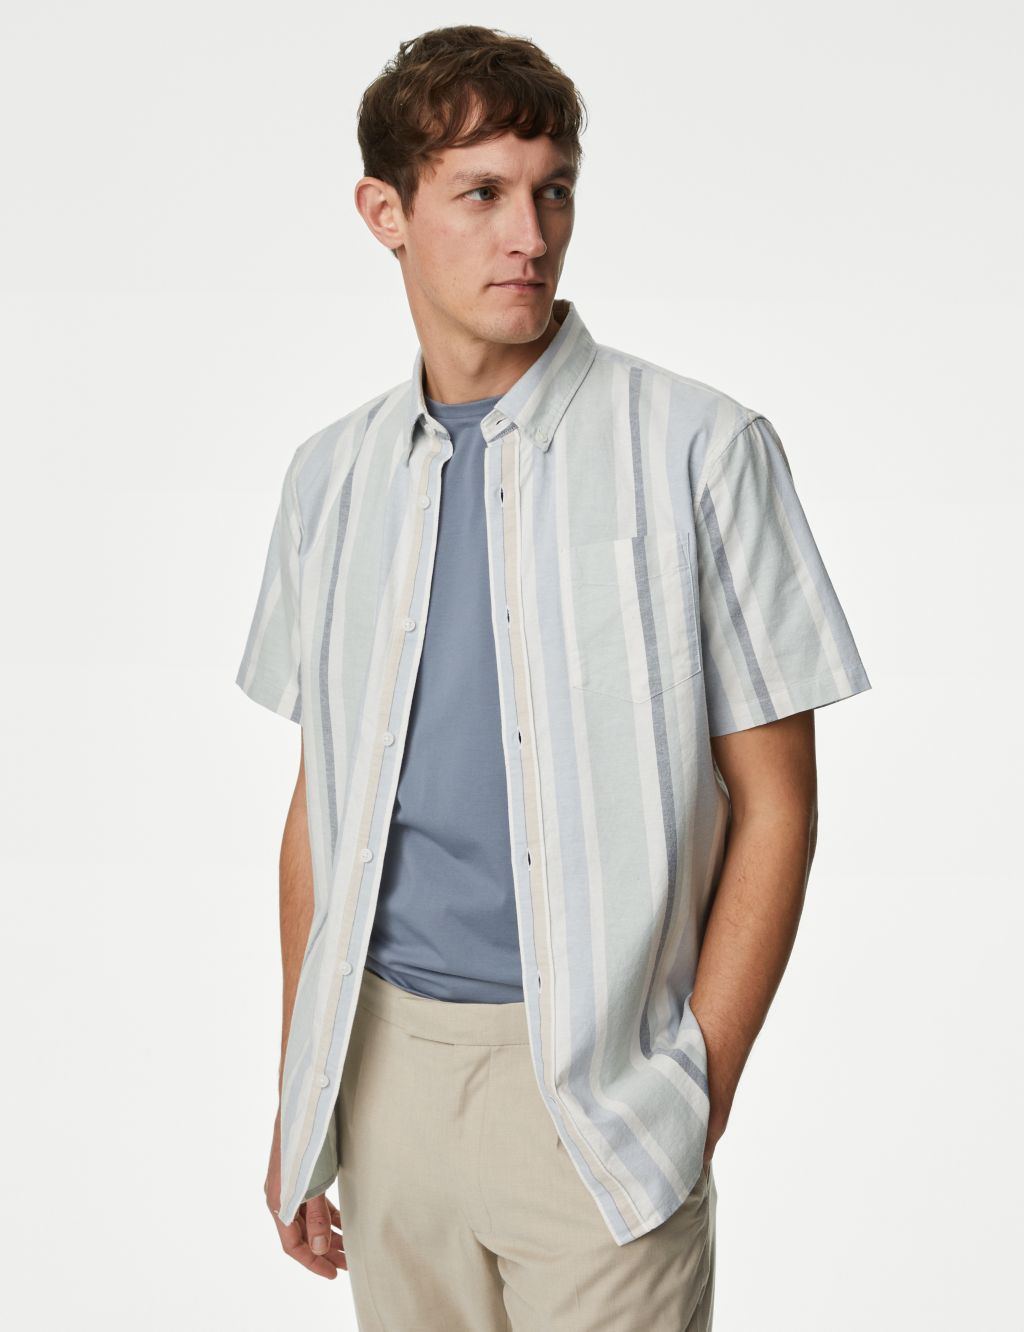 Page 2 - Men's Short-Sleeved Shirts | M&S